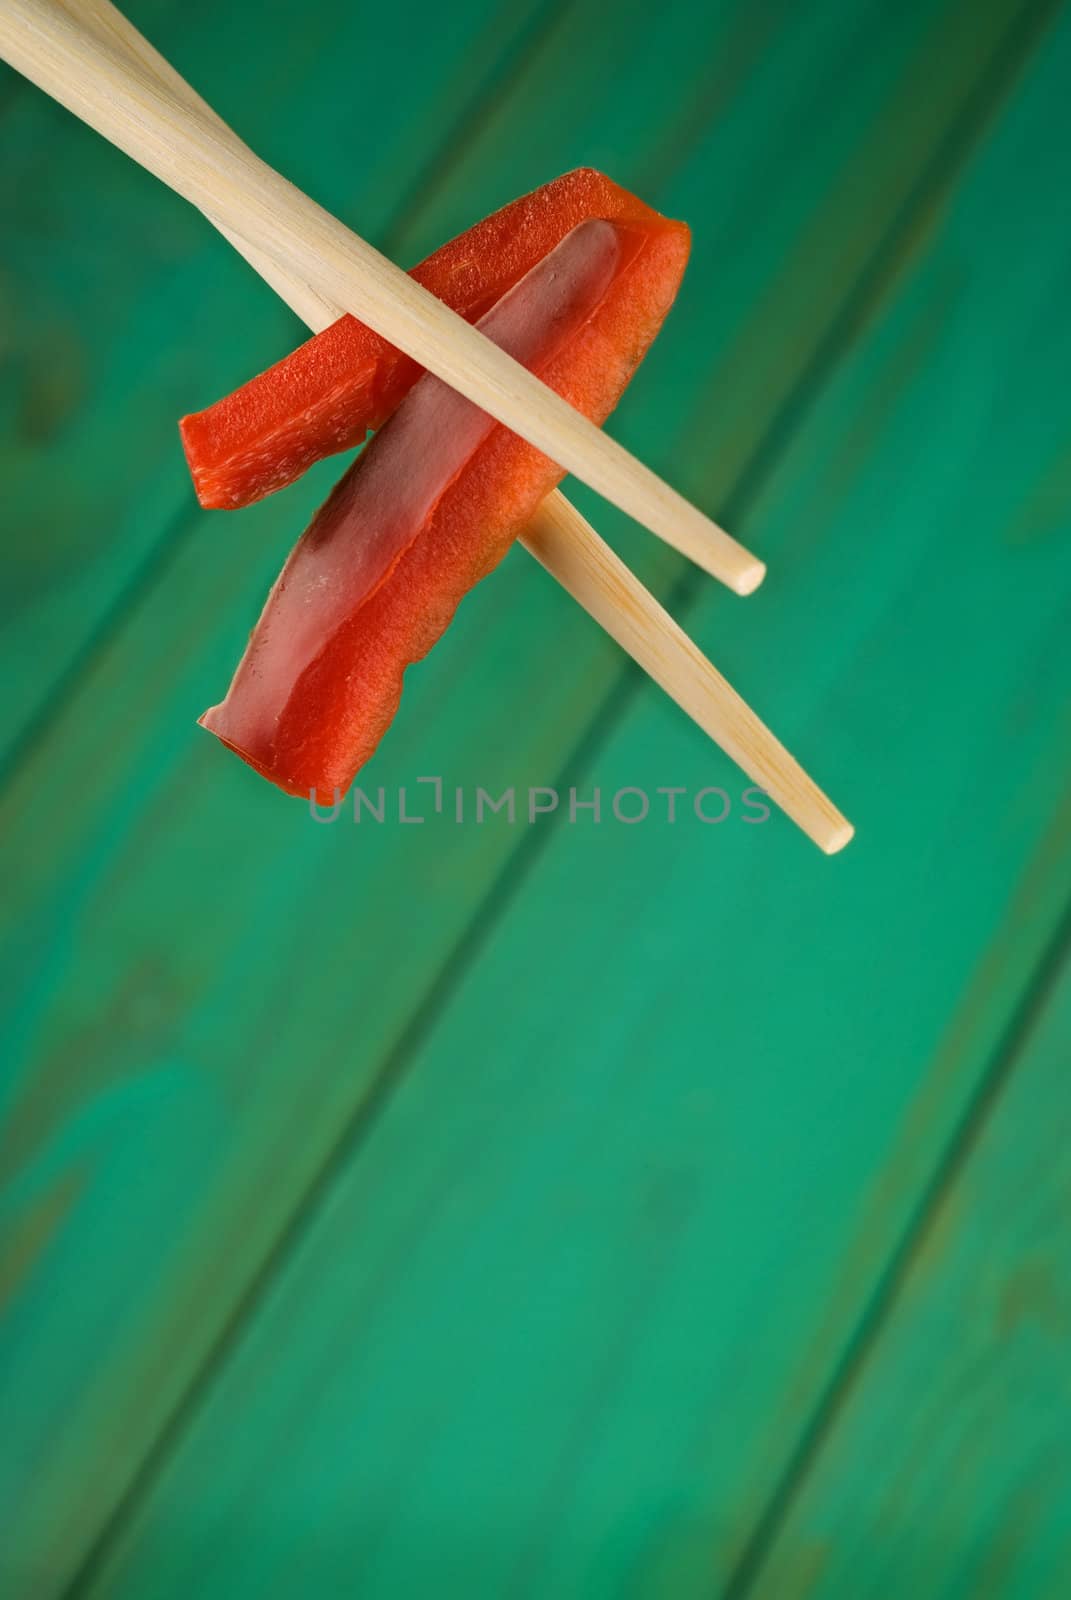 Chopsticks holding two red peppers over wooden table